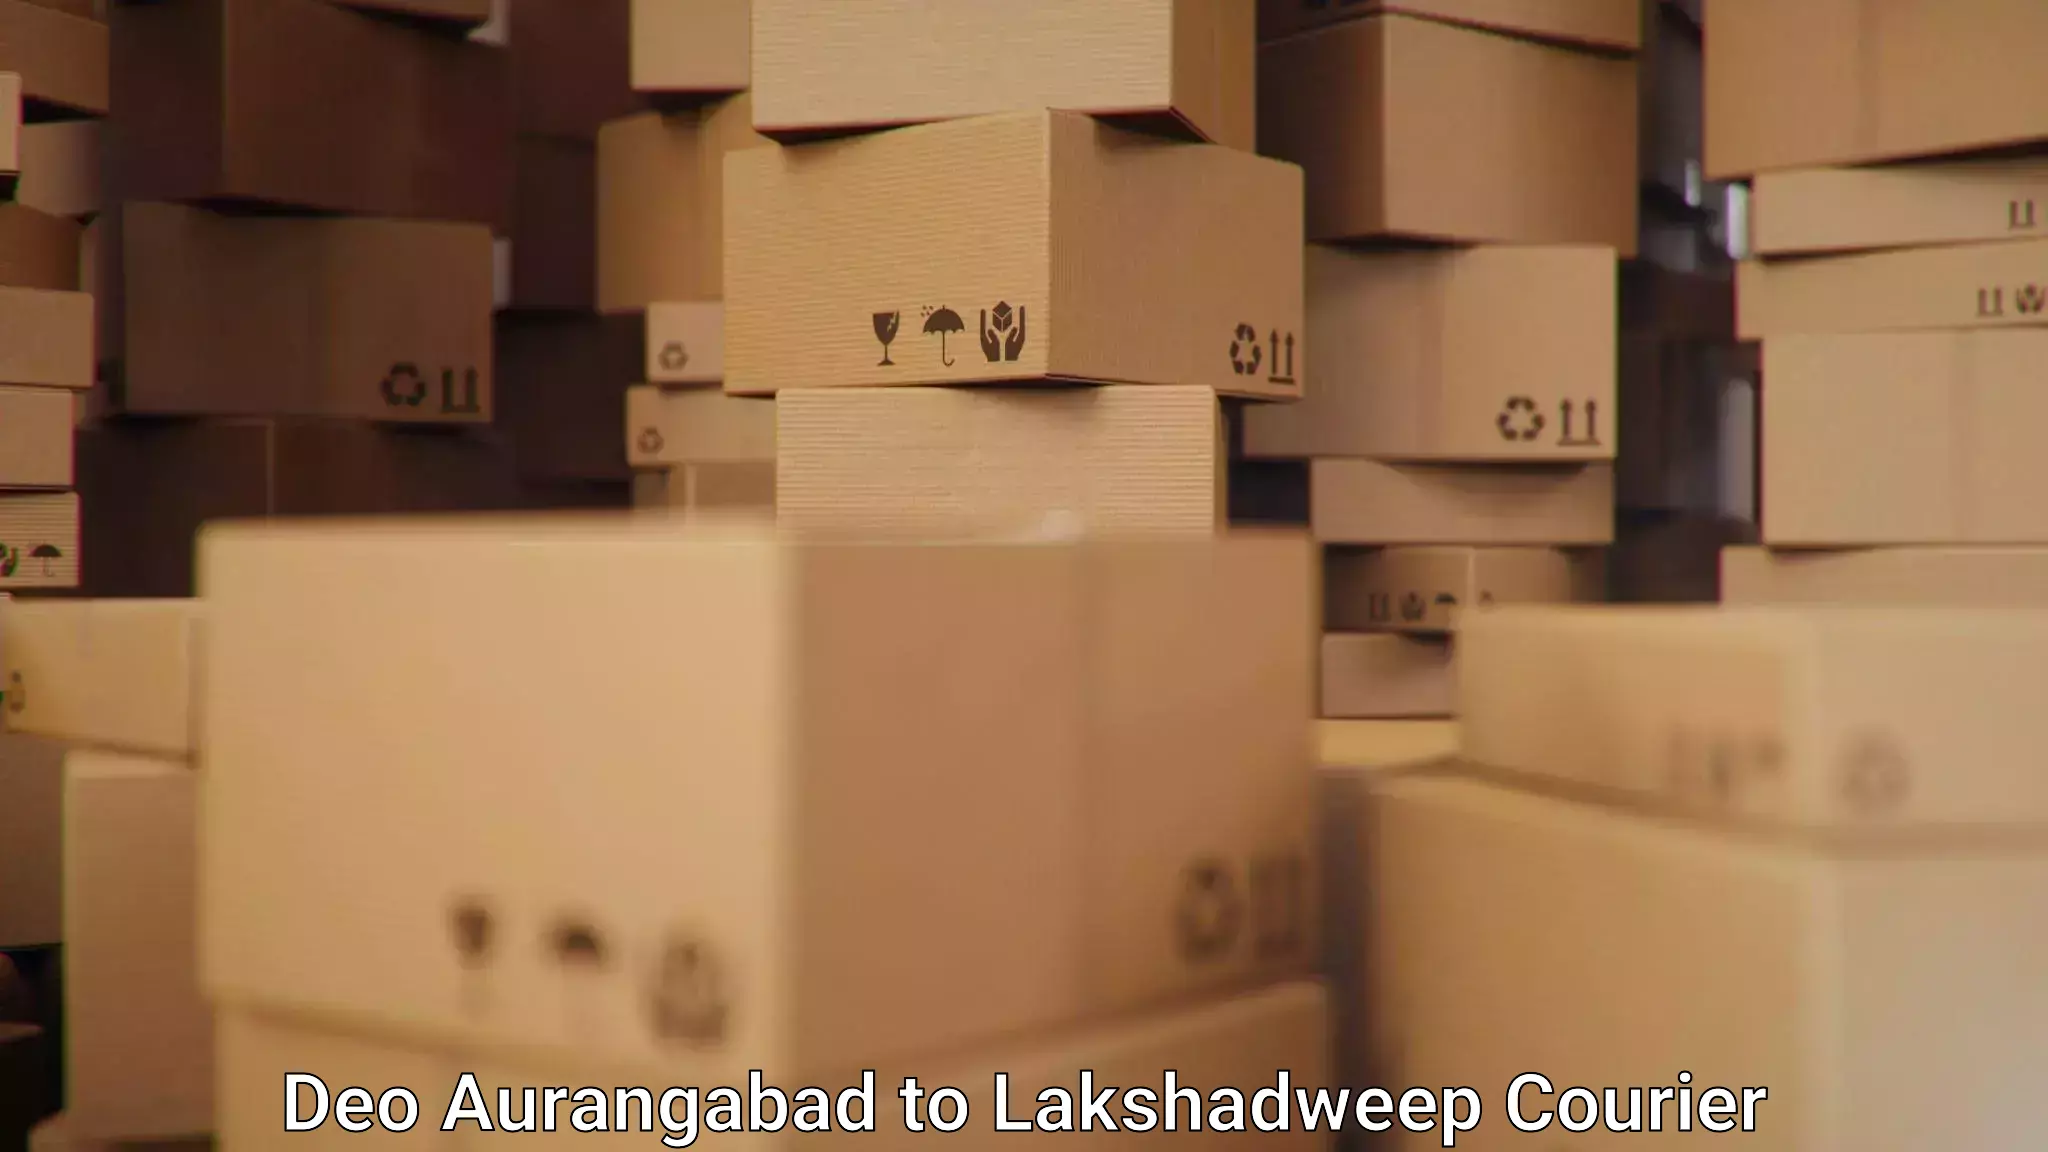 Secure freight services Deo Aurangabad to Lakshadweep